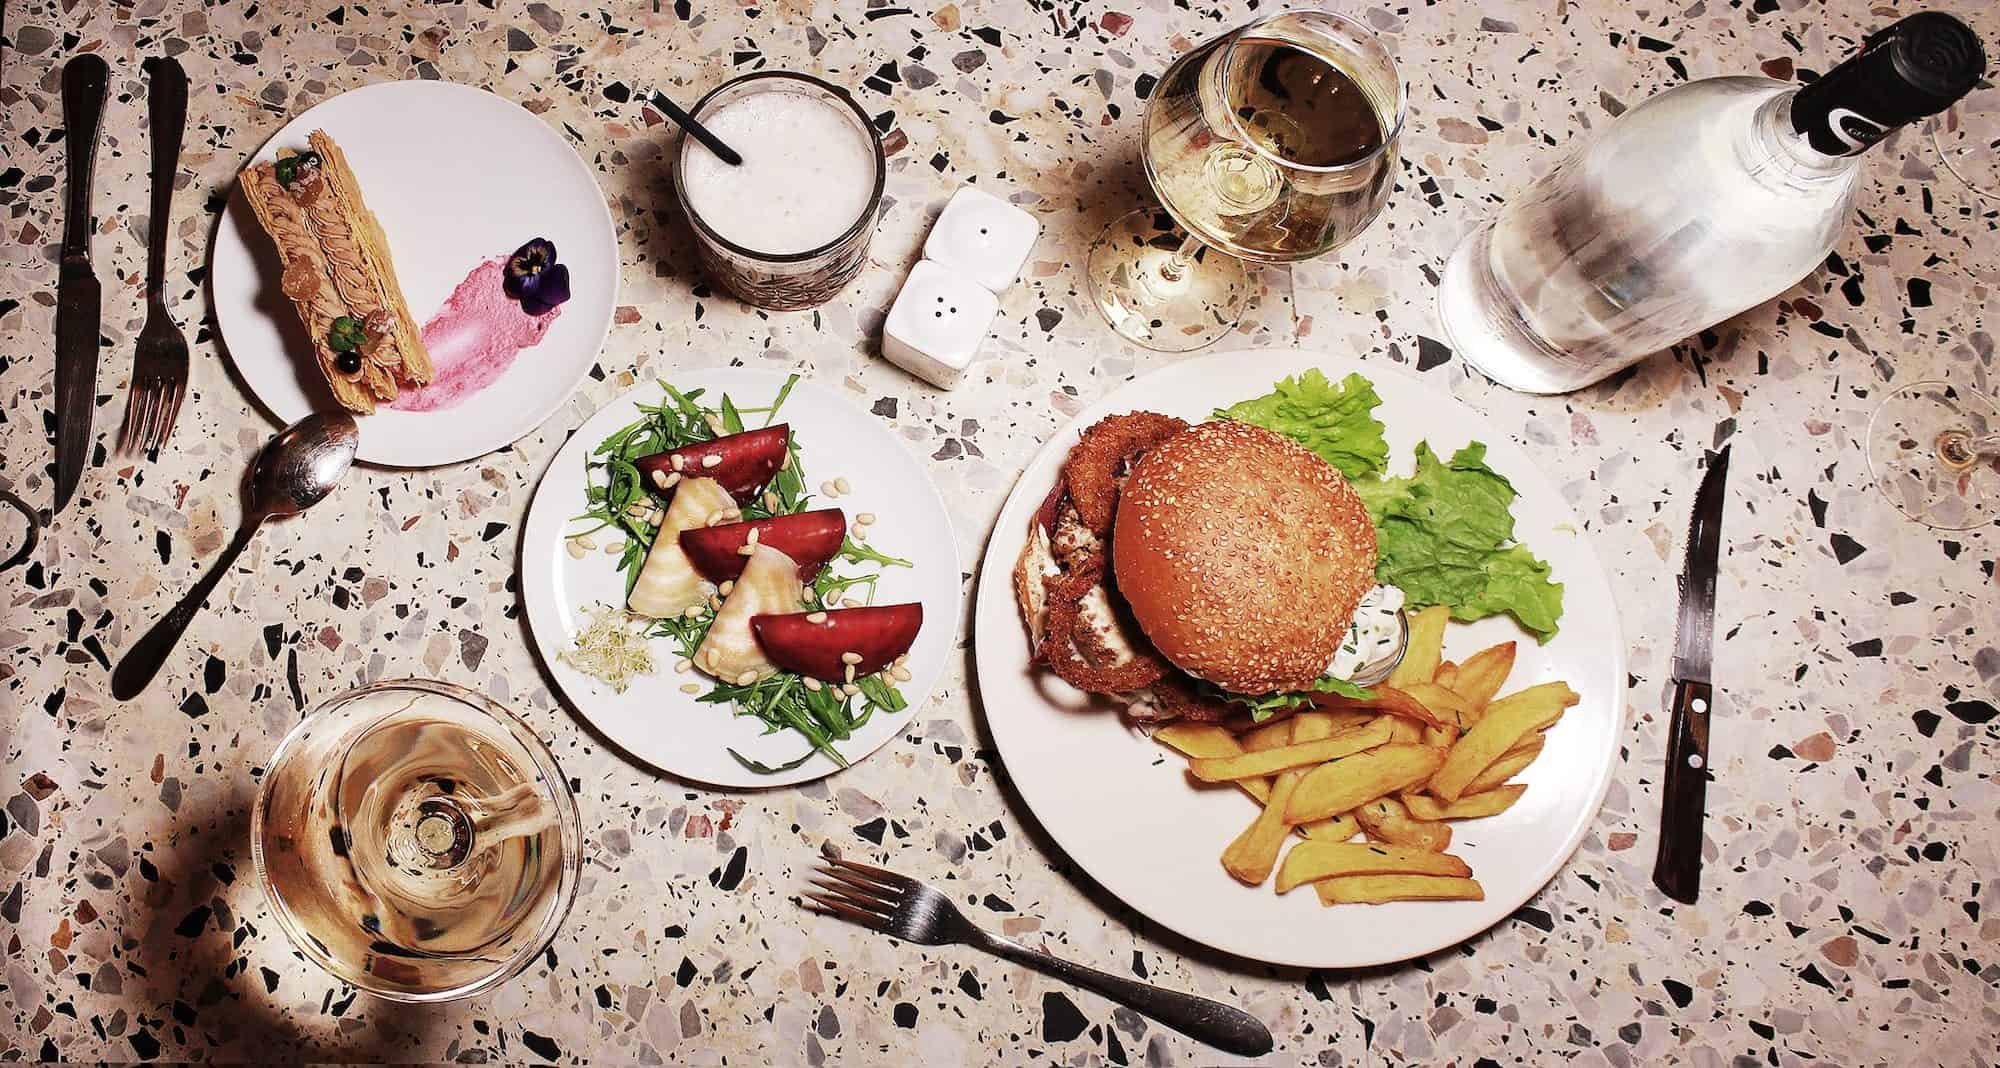 A spread of vegan burger with homemade fries and a starter of beetroot on a terrazzo table at BrEAThe restaurant in Paris.